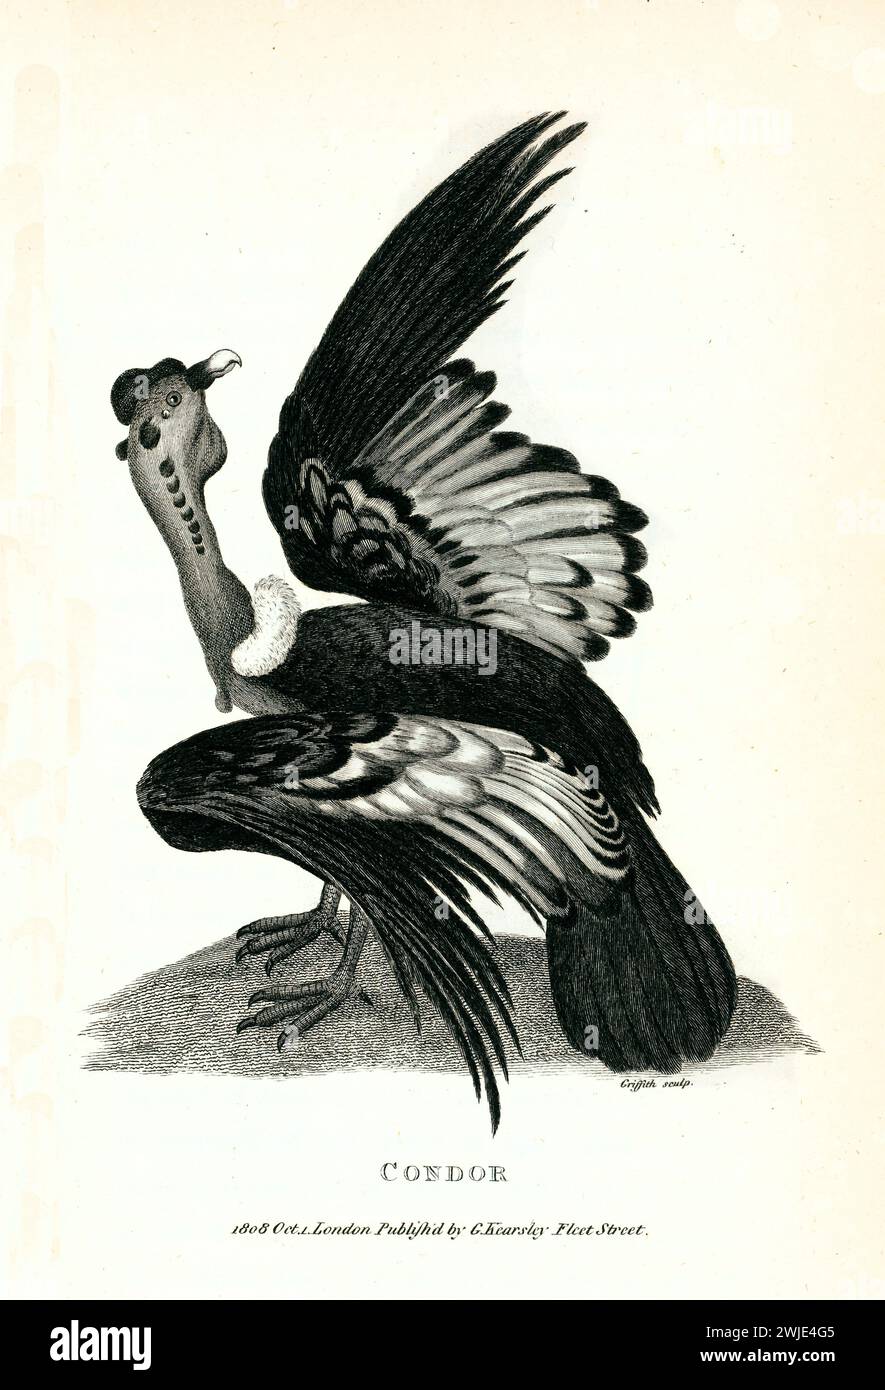 Old engraved illustration of Condor. Created by George Shaw, published in Zoological Lectures, London, 1809. Stock Photo